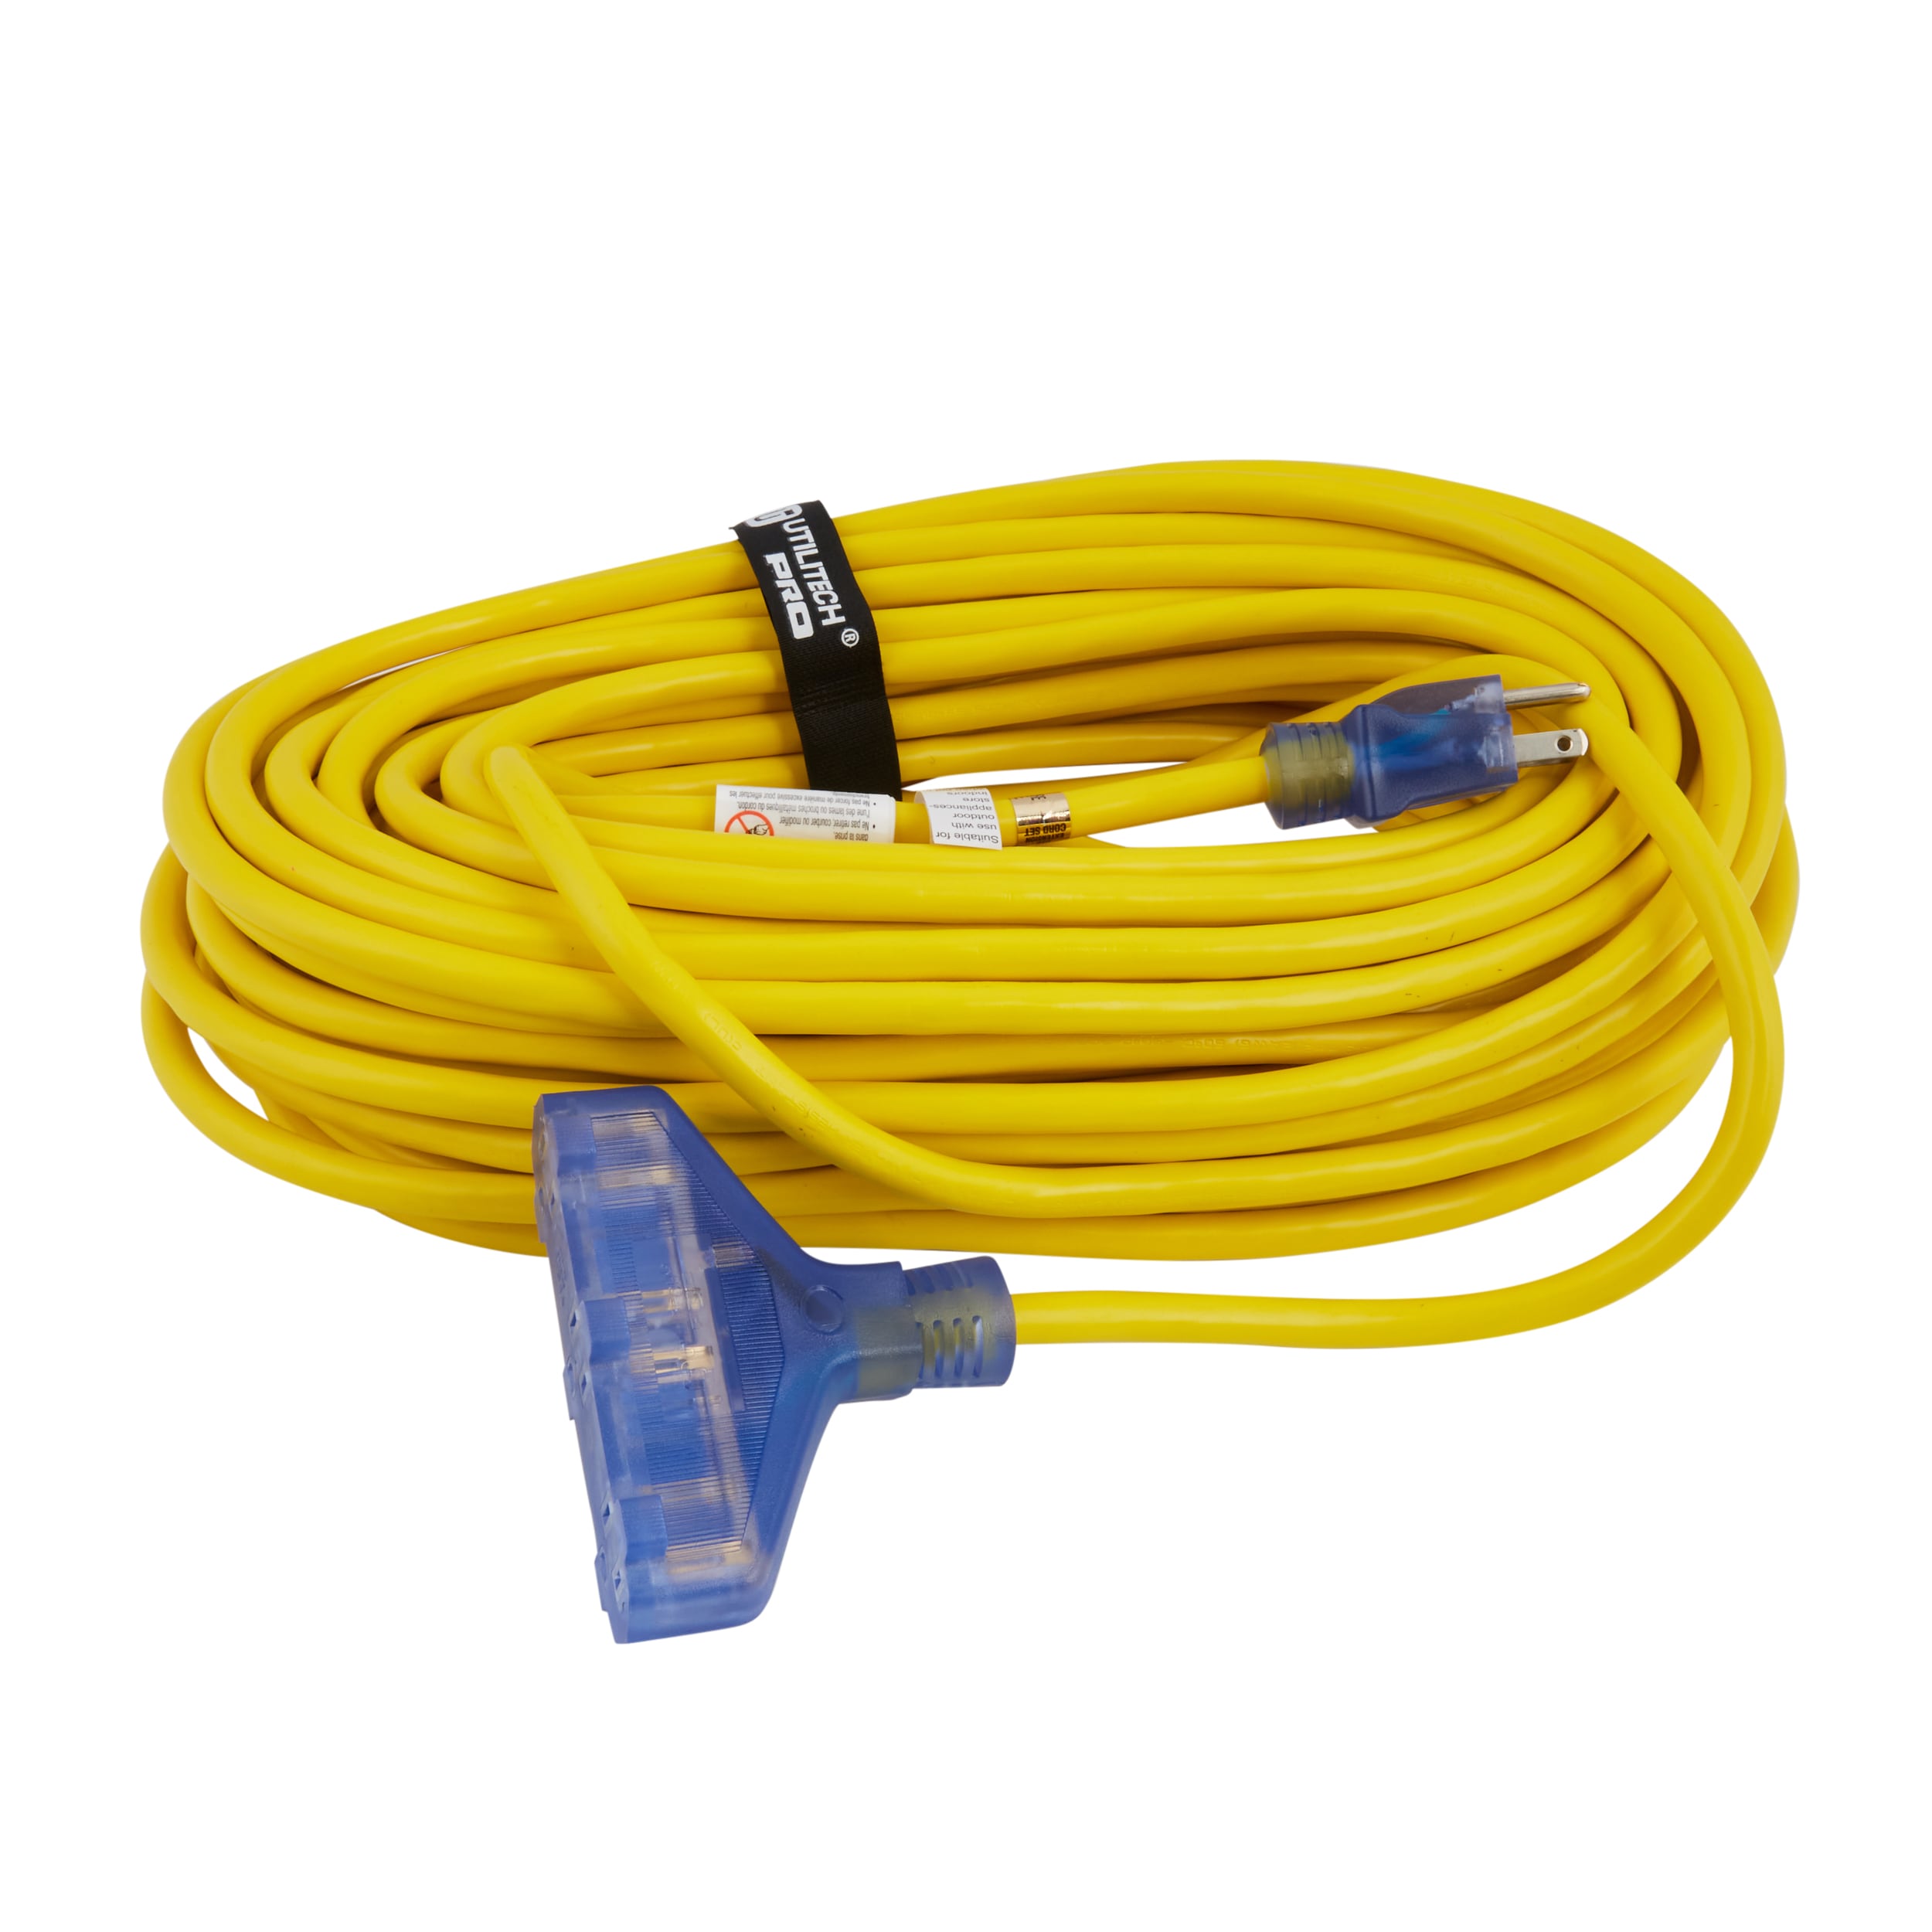 Quick Tip – Extension Cord Safety